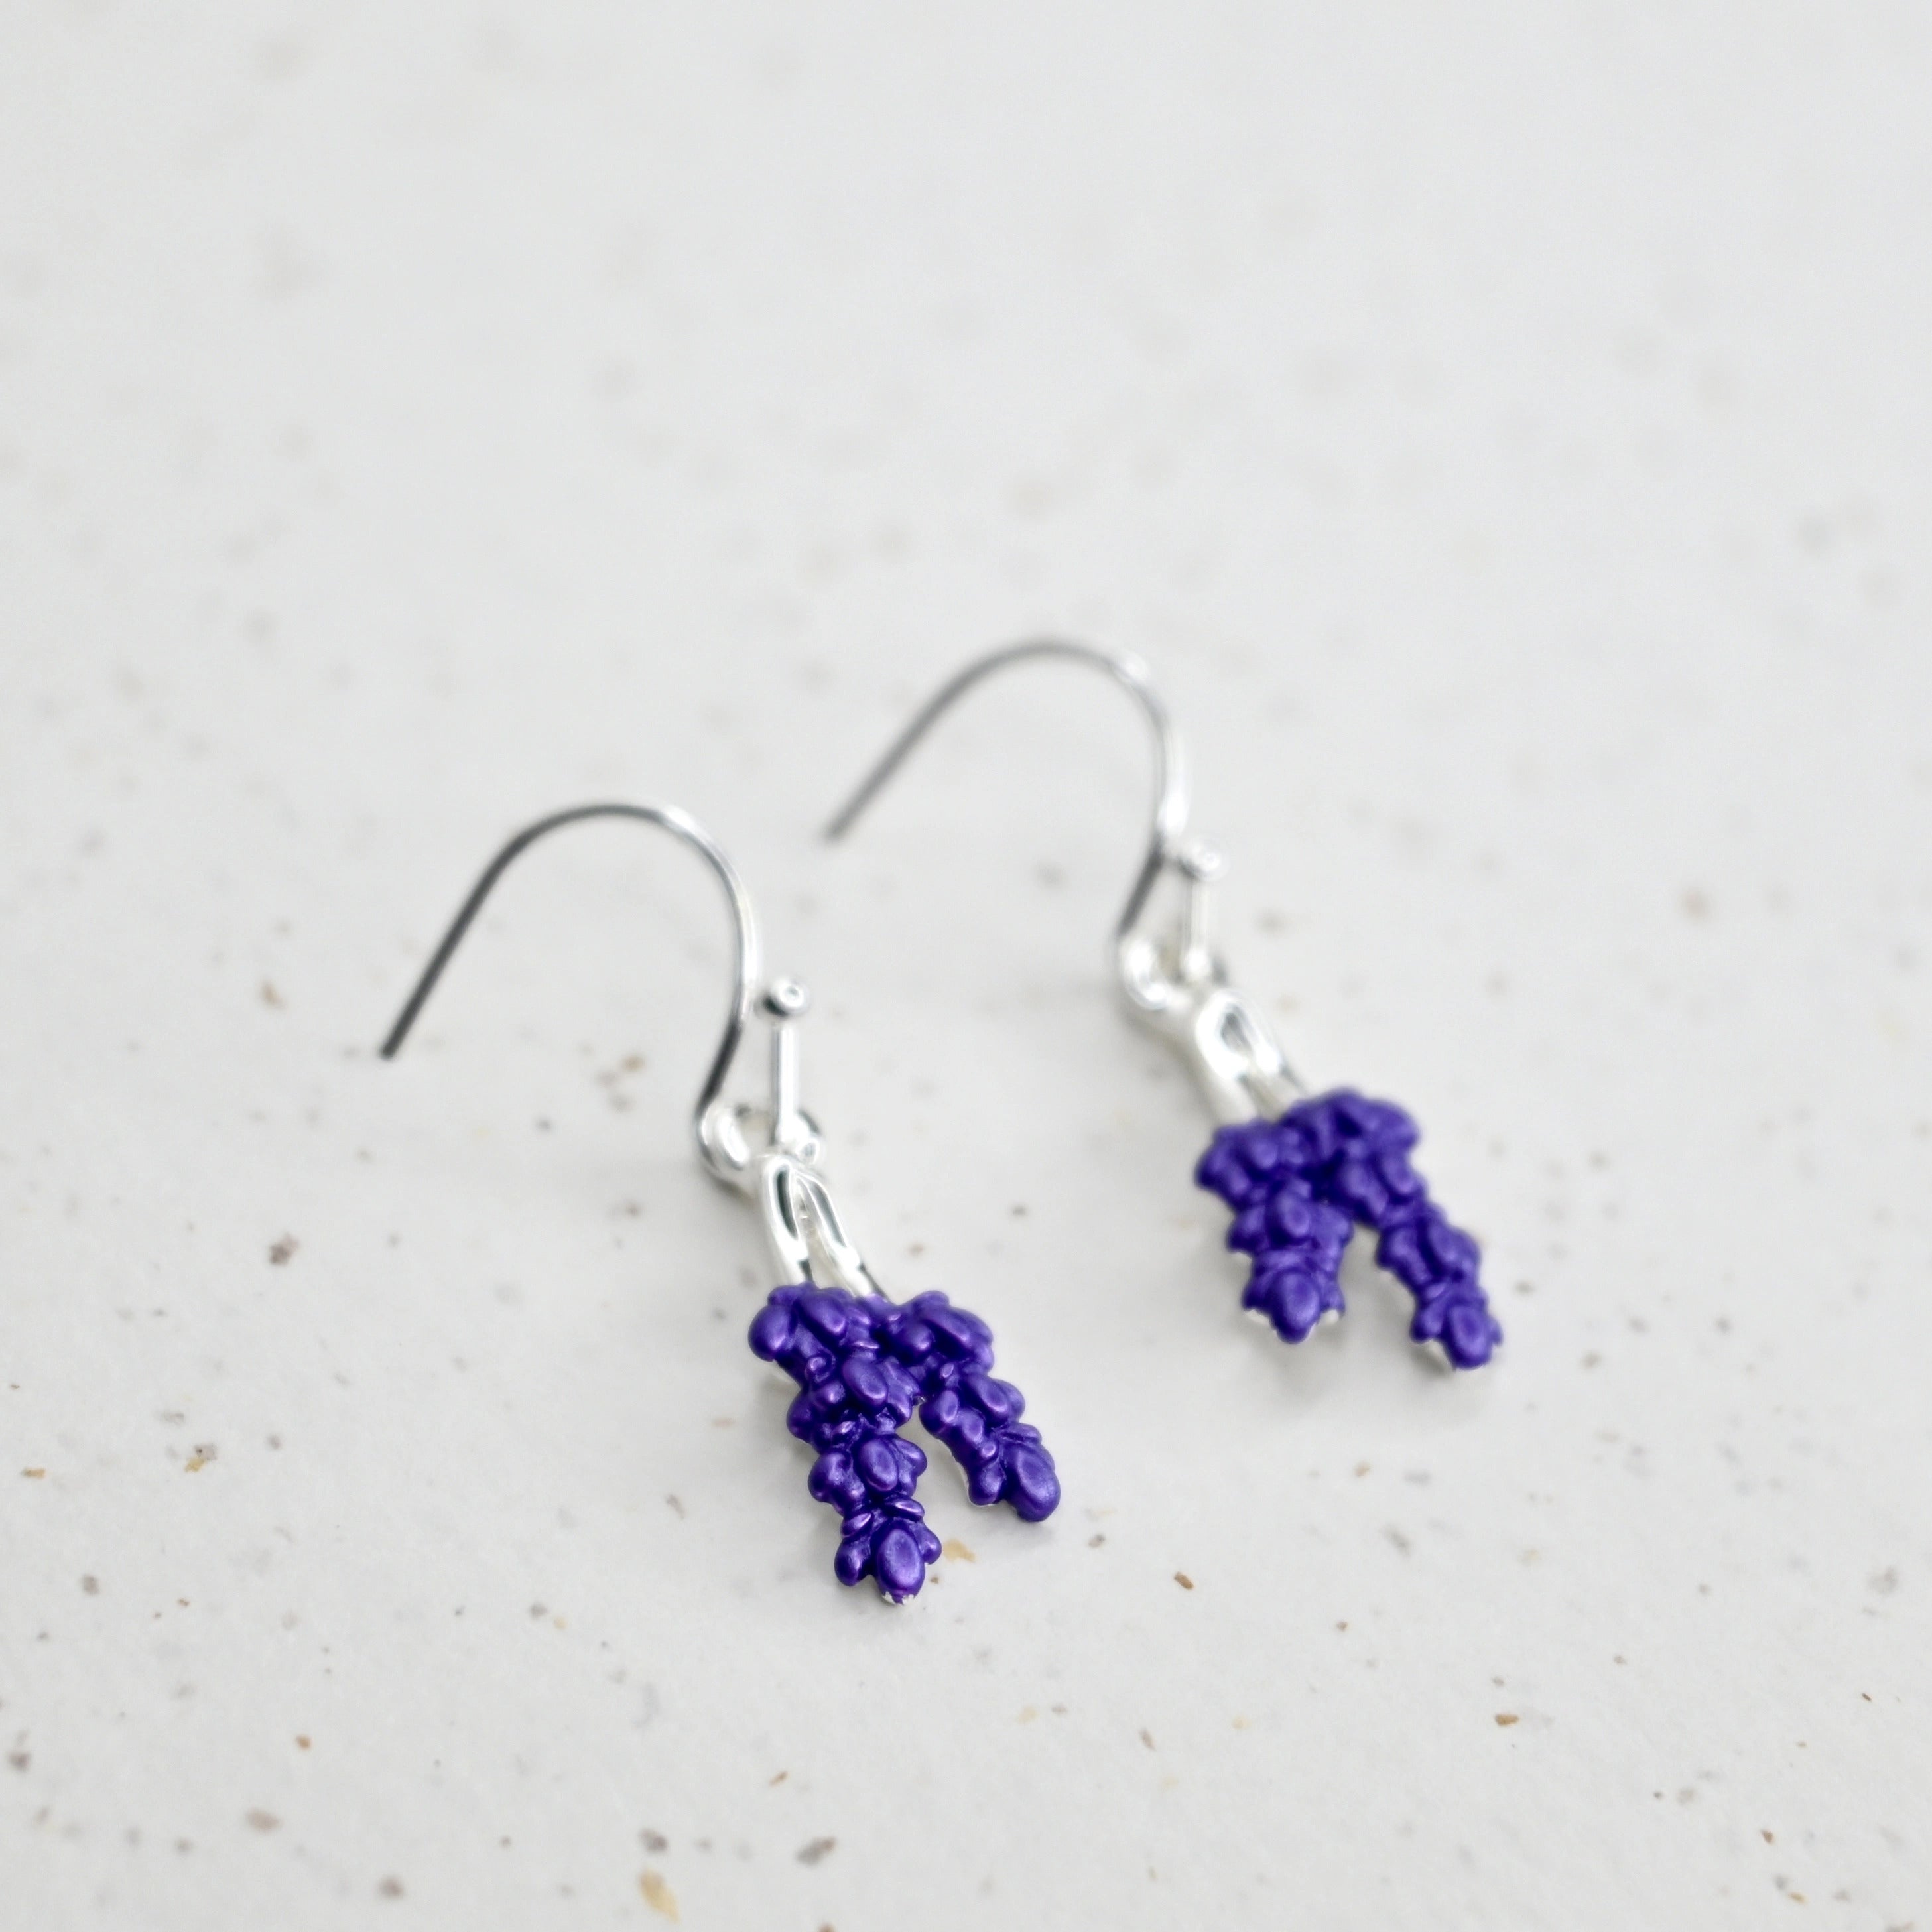 Handcrafted Lavender Earrings in Silver